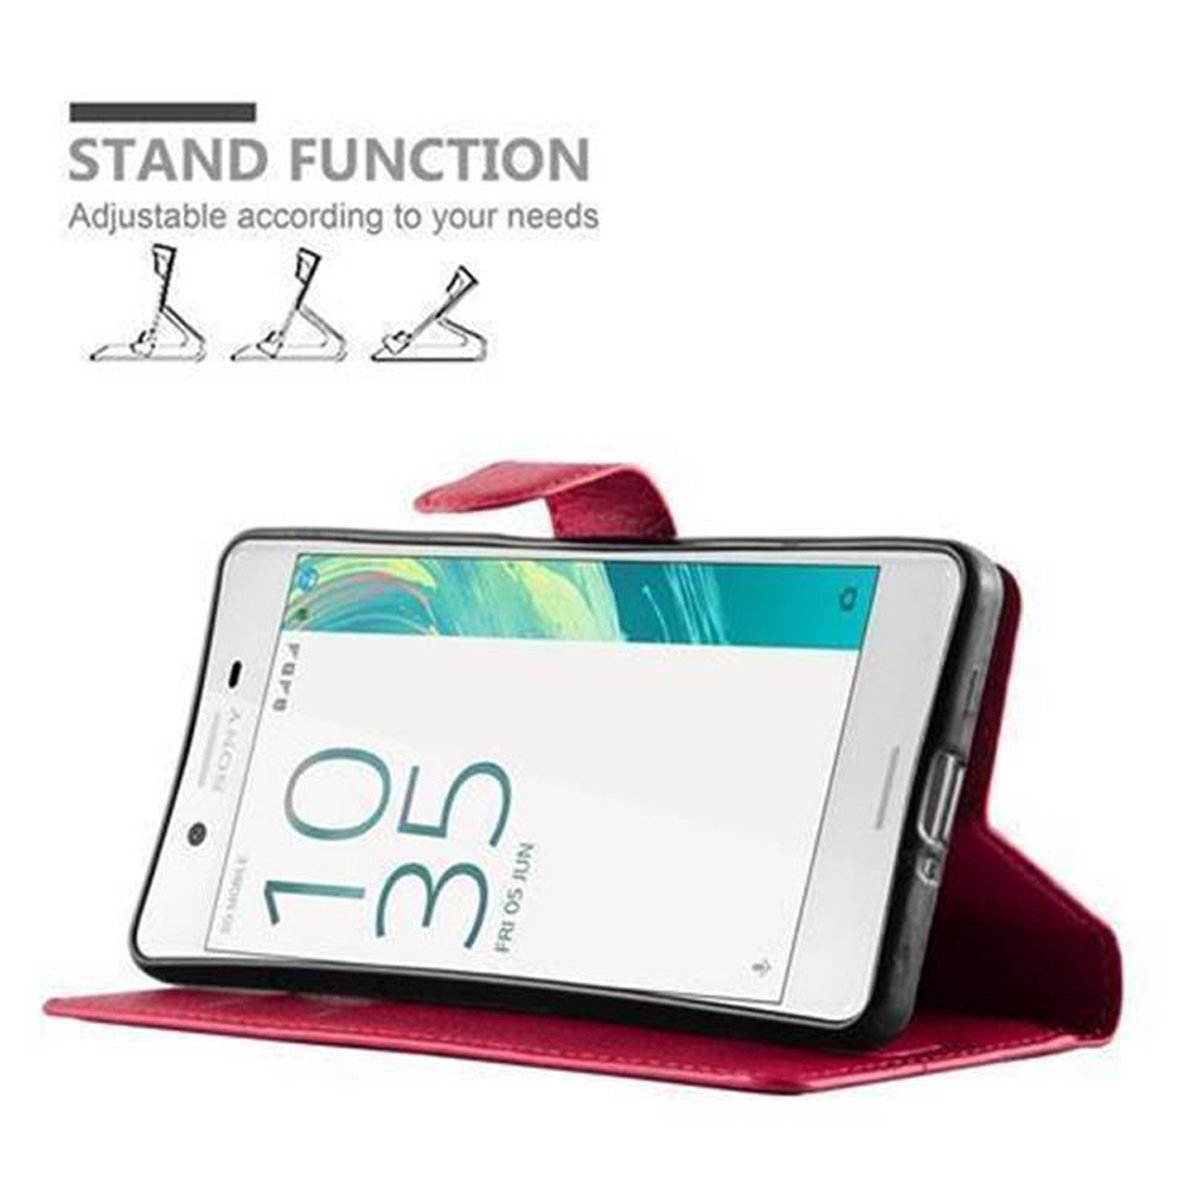 Standfunktion, Xperia X Hülle Bookcover, Sony, CADORABO Book KARMIN ROT PERFORMANCE,